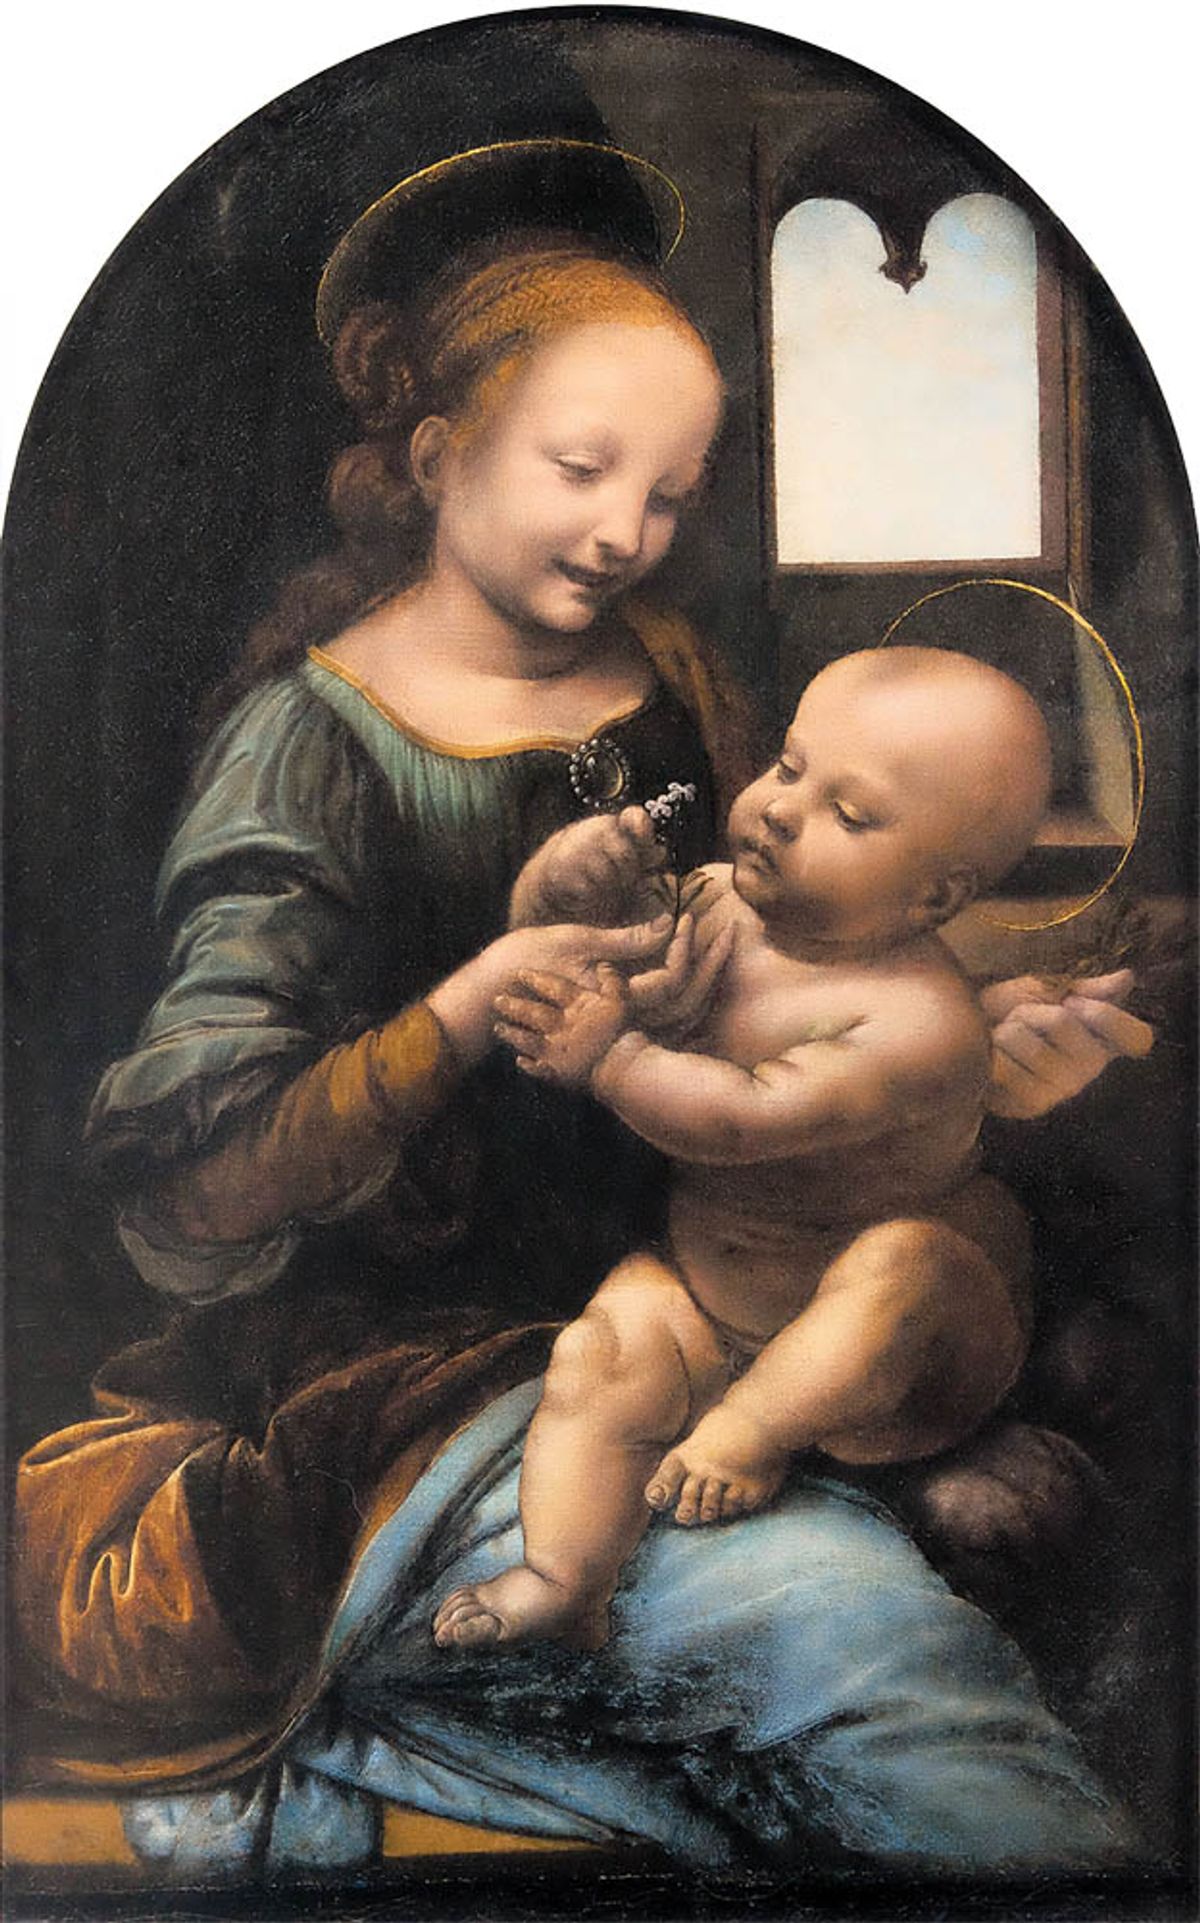 The Hermitage had been due to lend Leonardo’s Benois Madonna (1478-80)to the Galleria Nazionale dell’Umbria